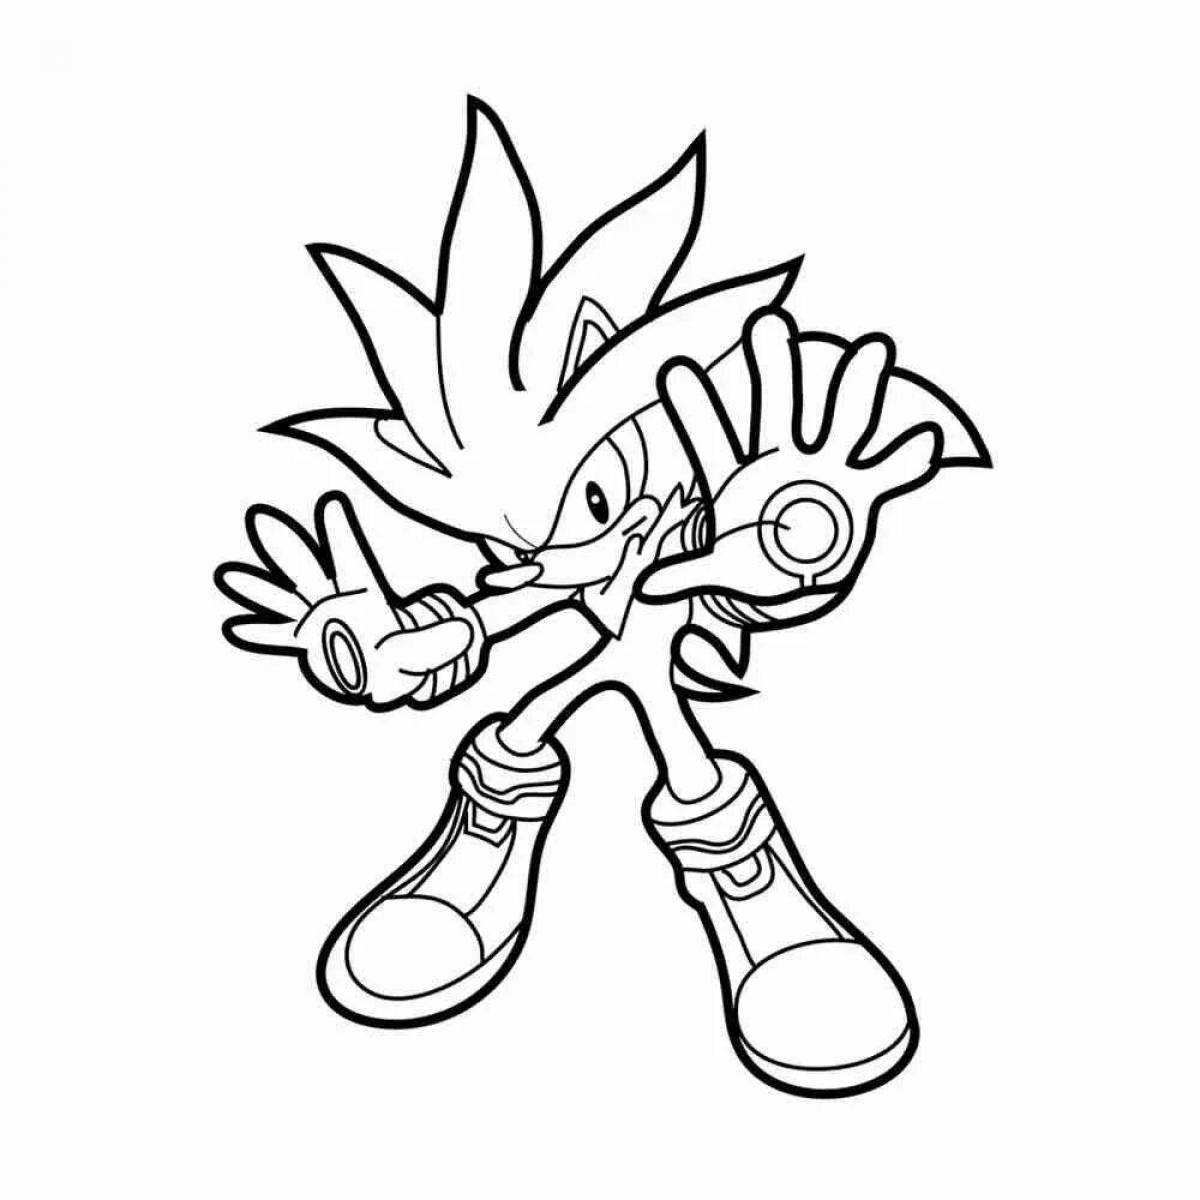 Sonic god brightly colored coloring page